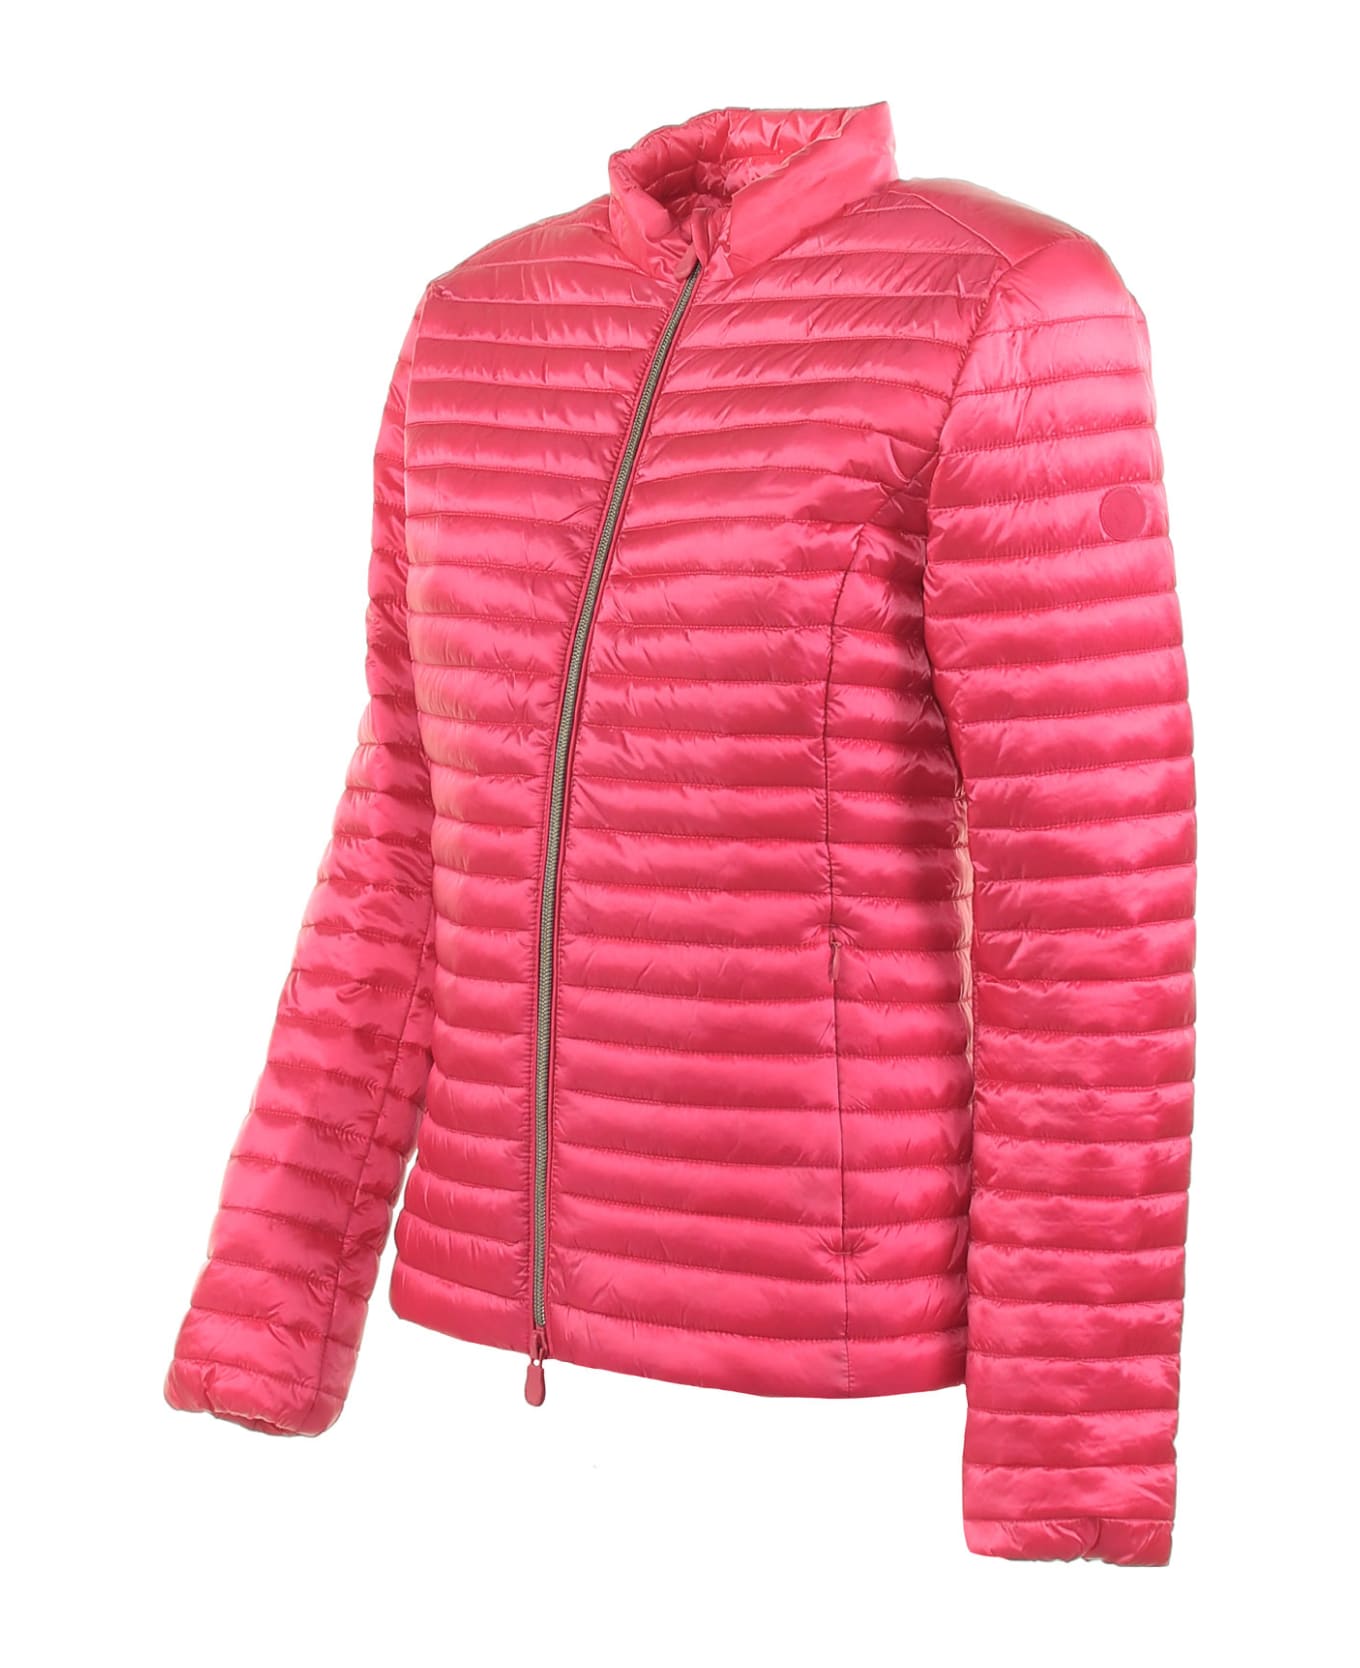 Save the Duck Pearly Pink Quilted Jacket - PINK